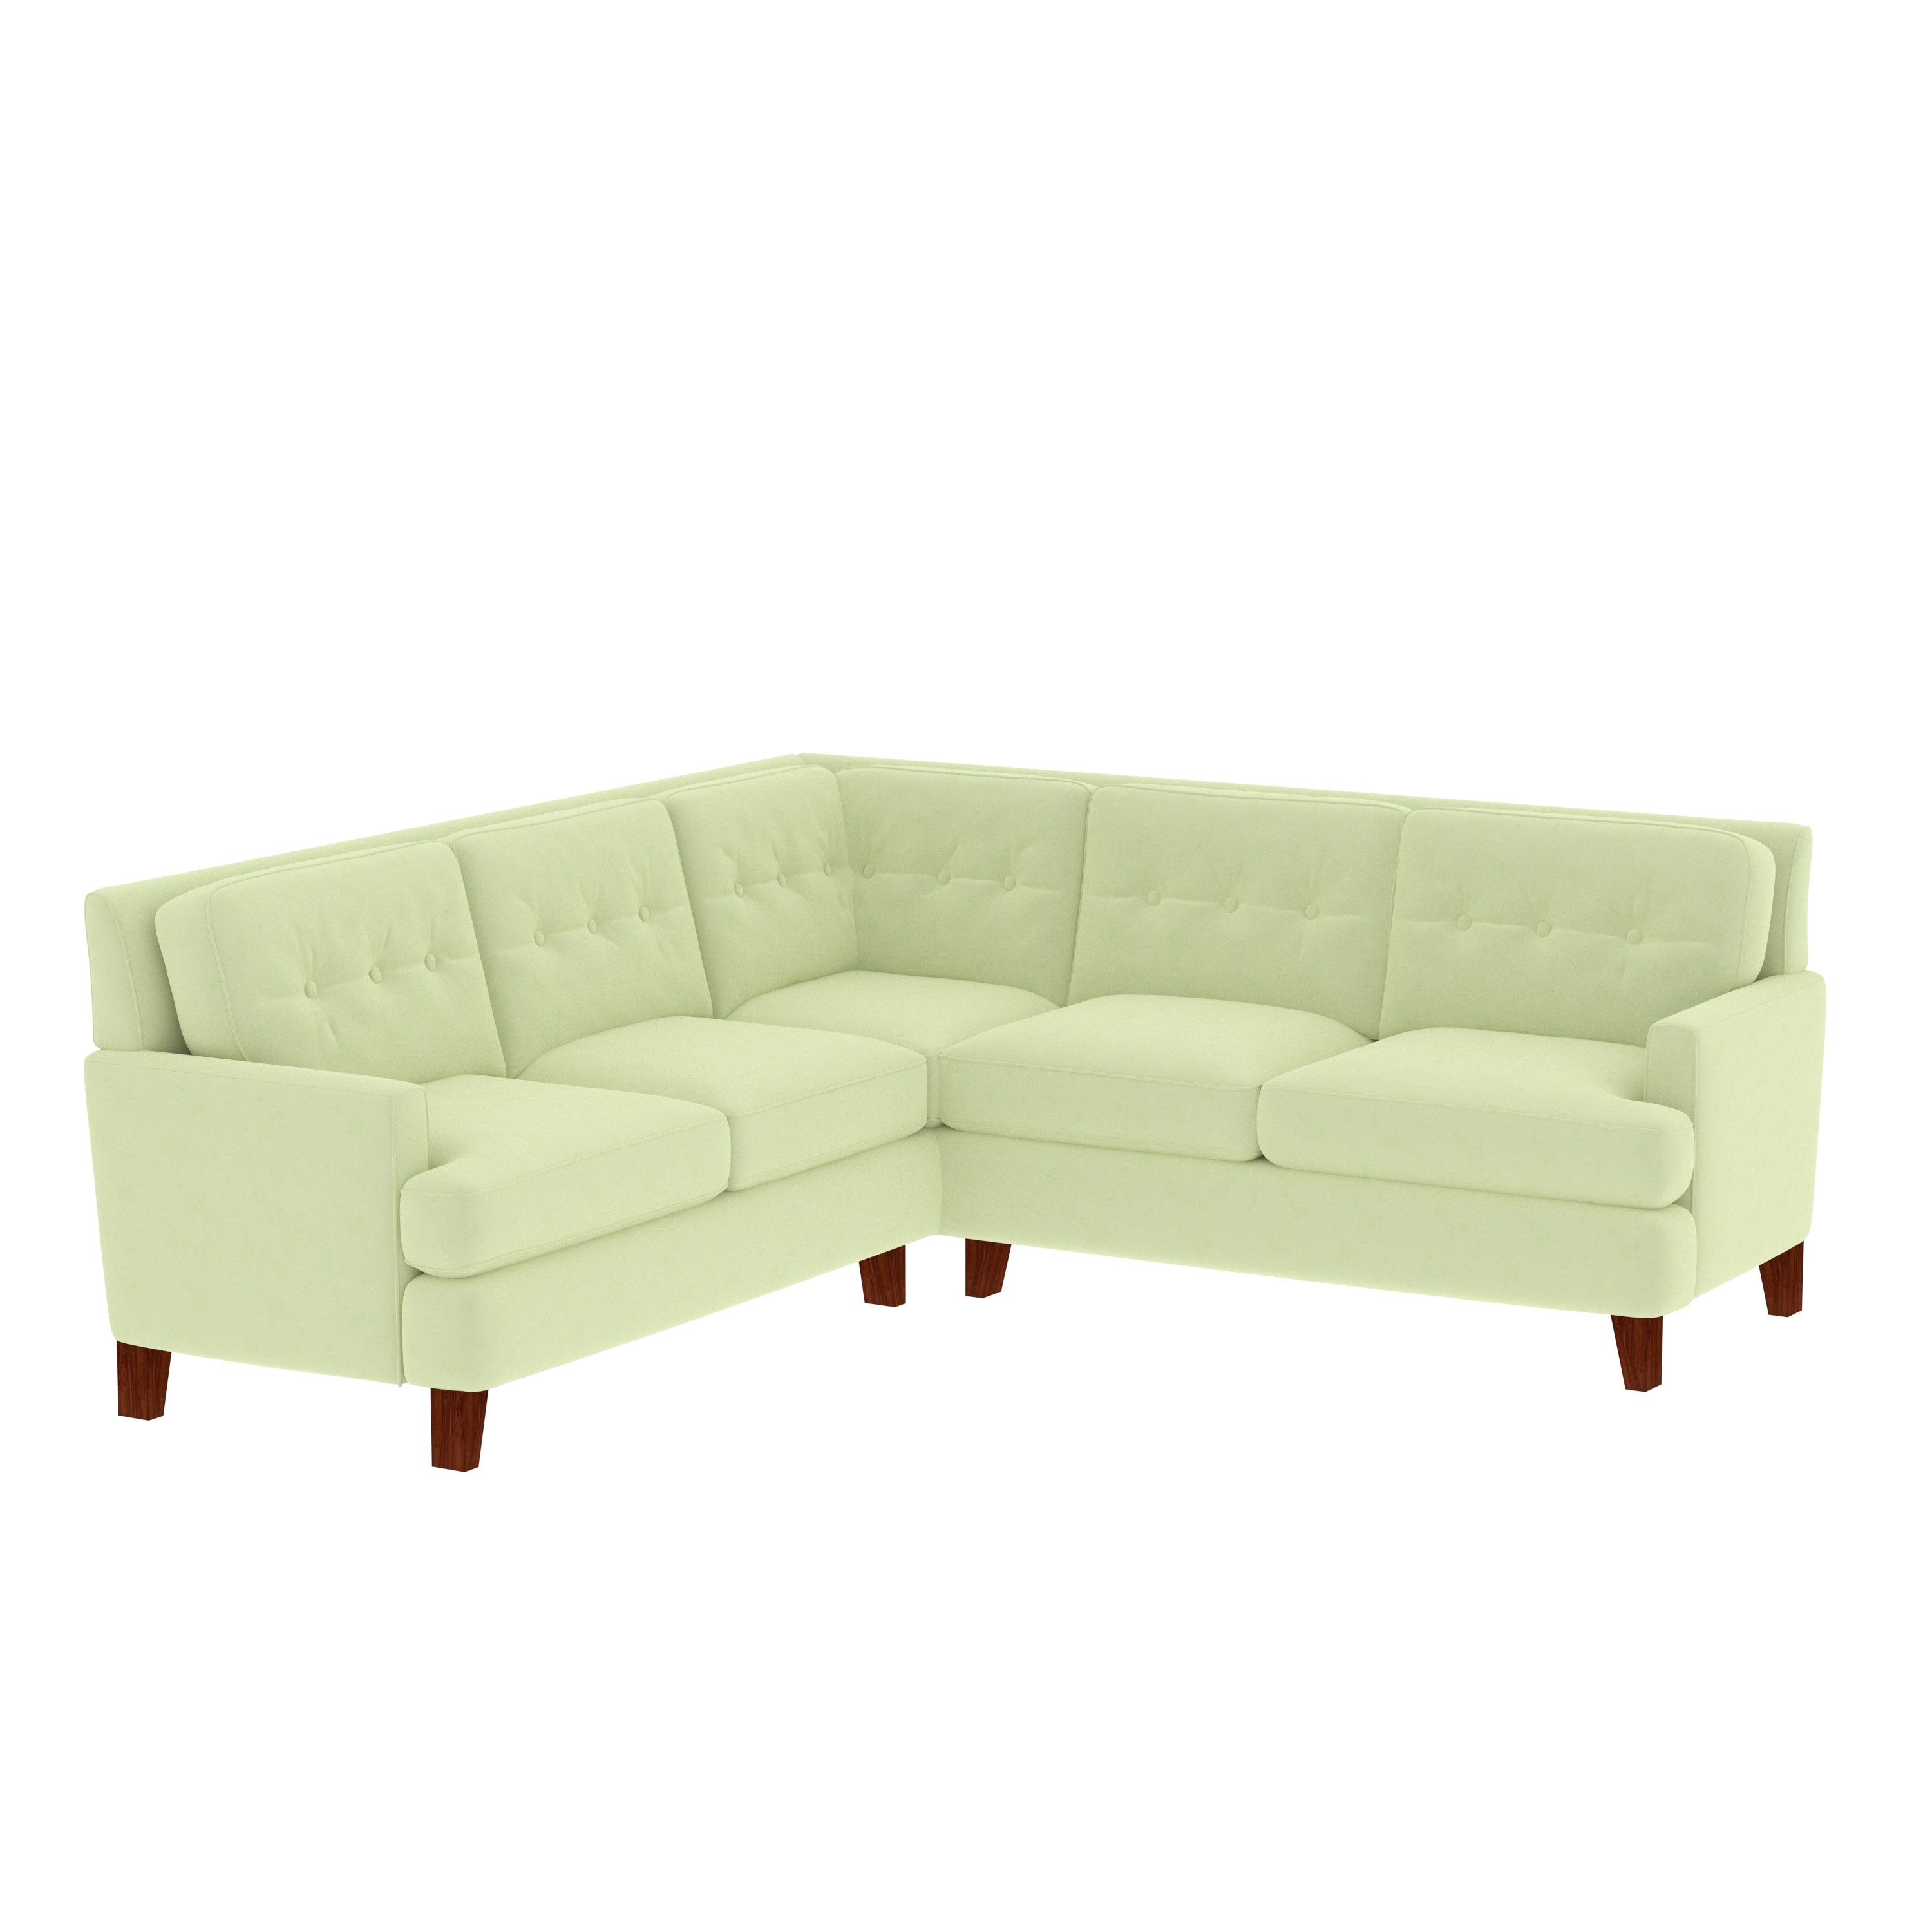 Celory Clat Premium Comfort L-shaped 4-Seating Sofa Set in Pastel Colours for Your Home Sofa